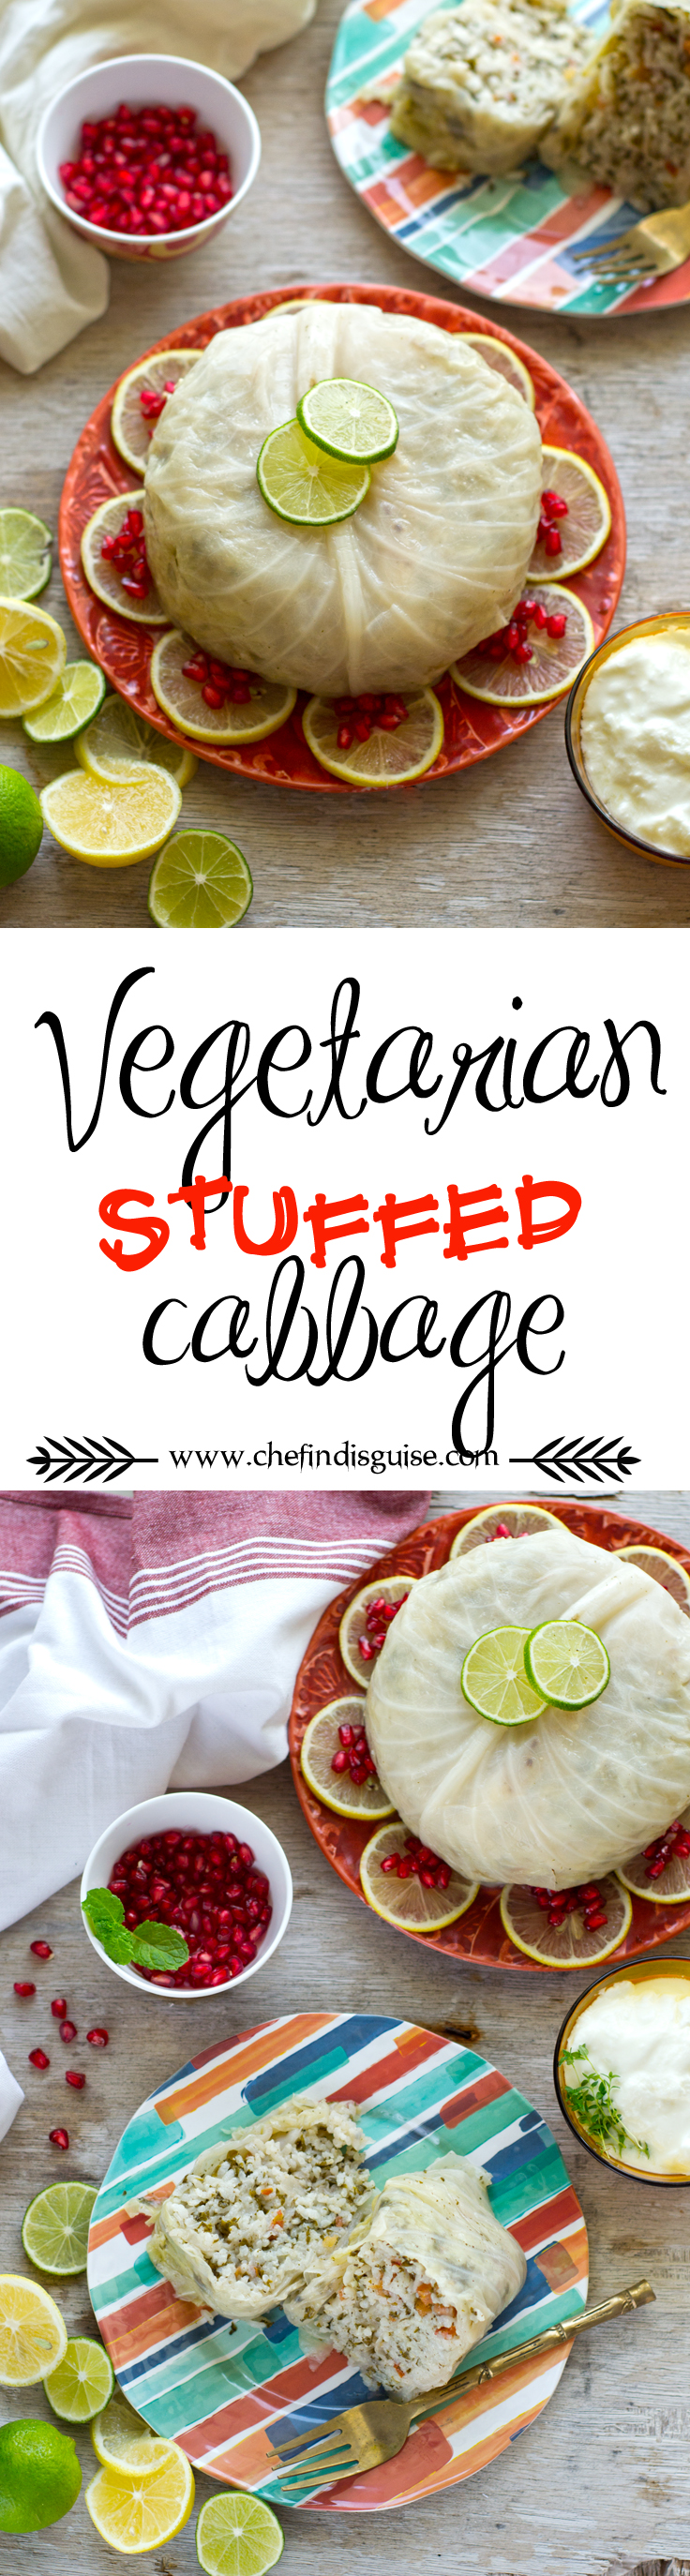 Vegetarian stuffed cabbage by chef in disguise.jpg